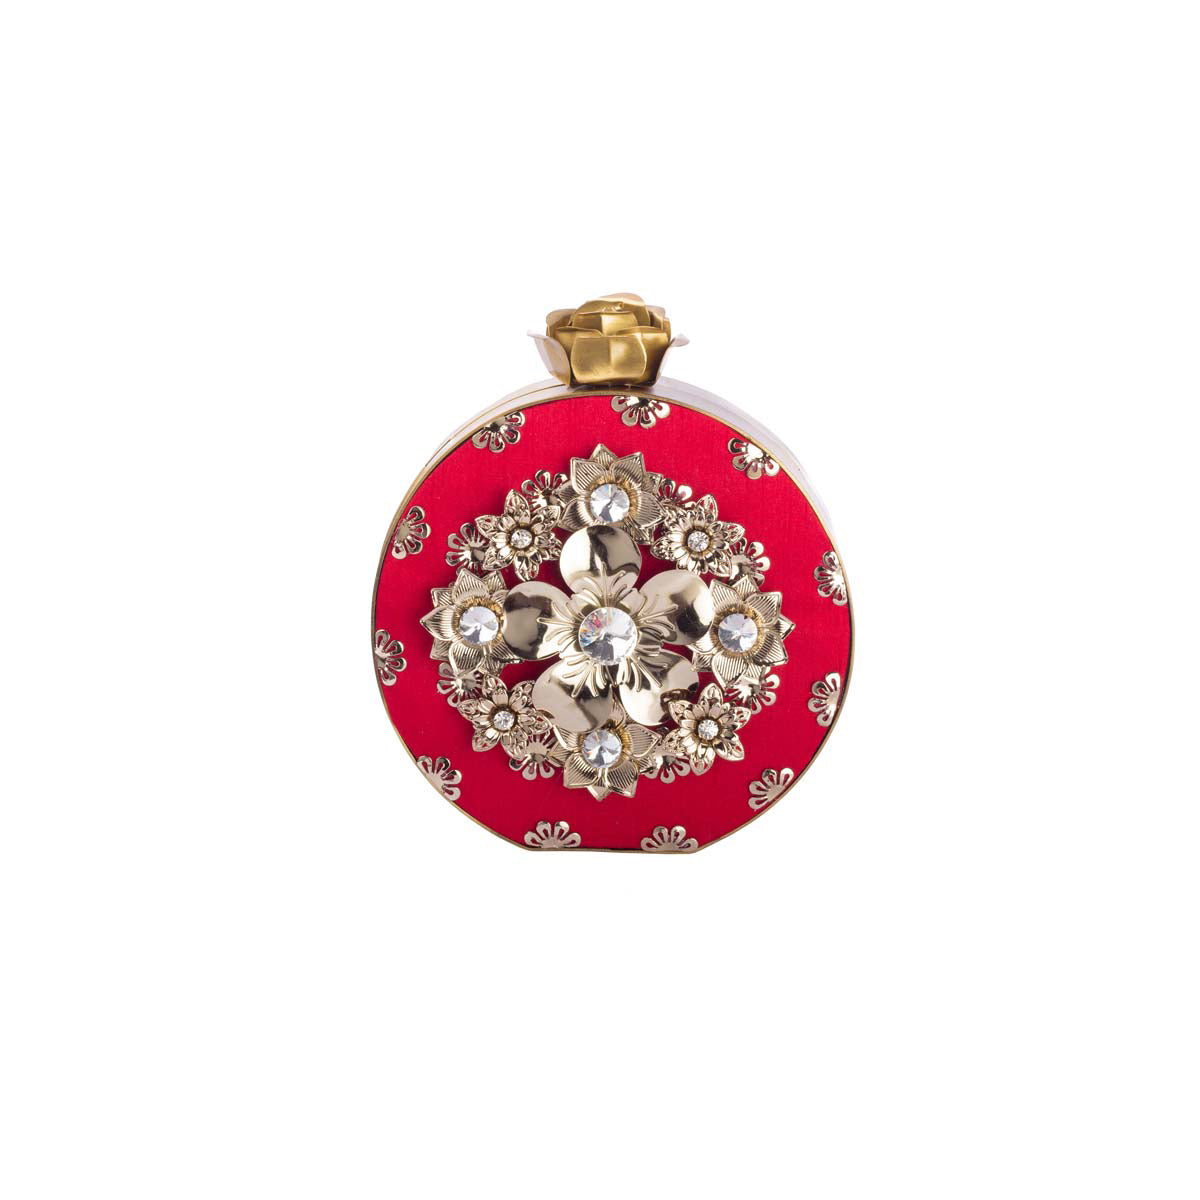 Ravishing and right off the runway, our red round clutch with metallic detailing and embellishments is your go-to for any Indian occasion.